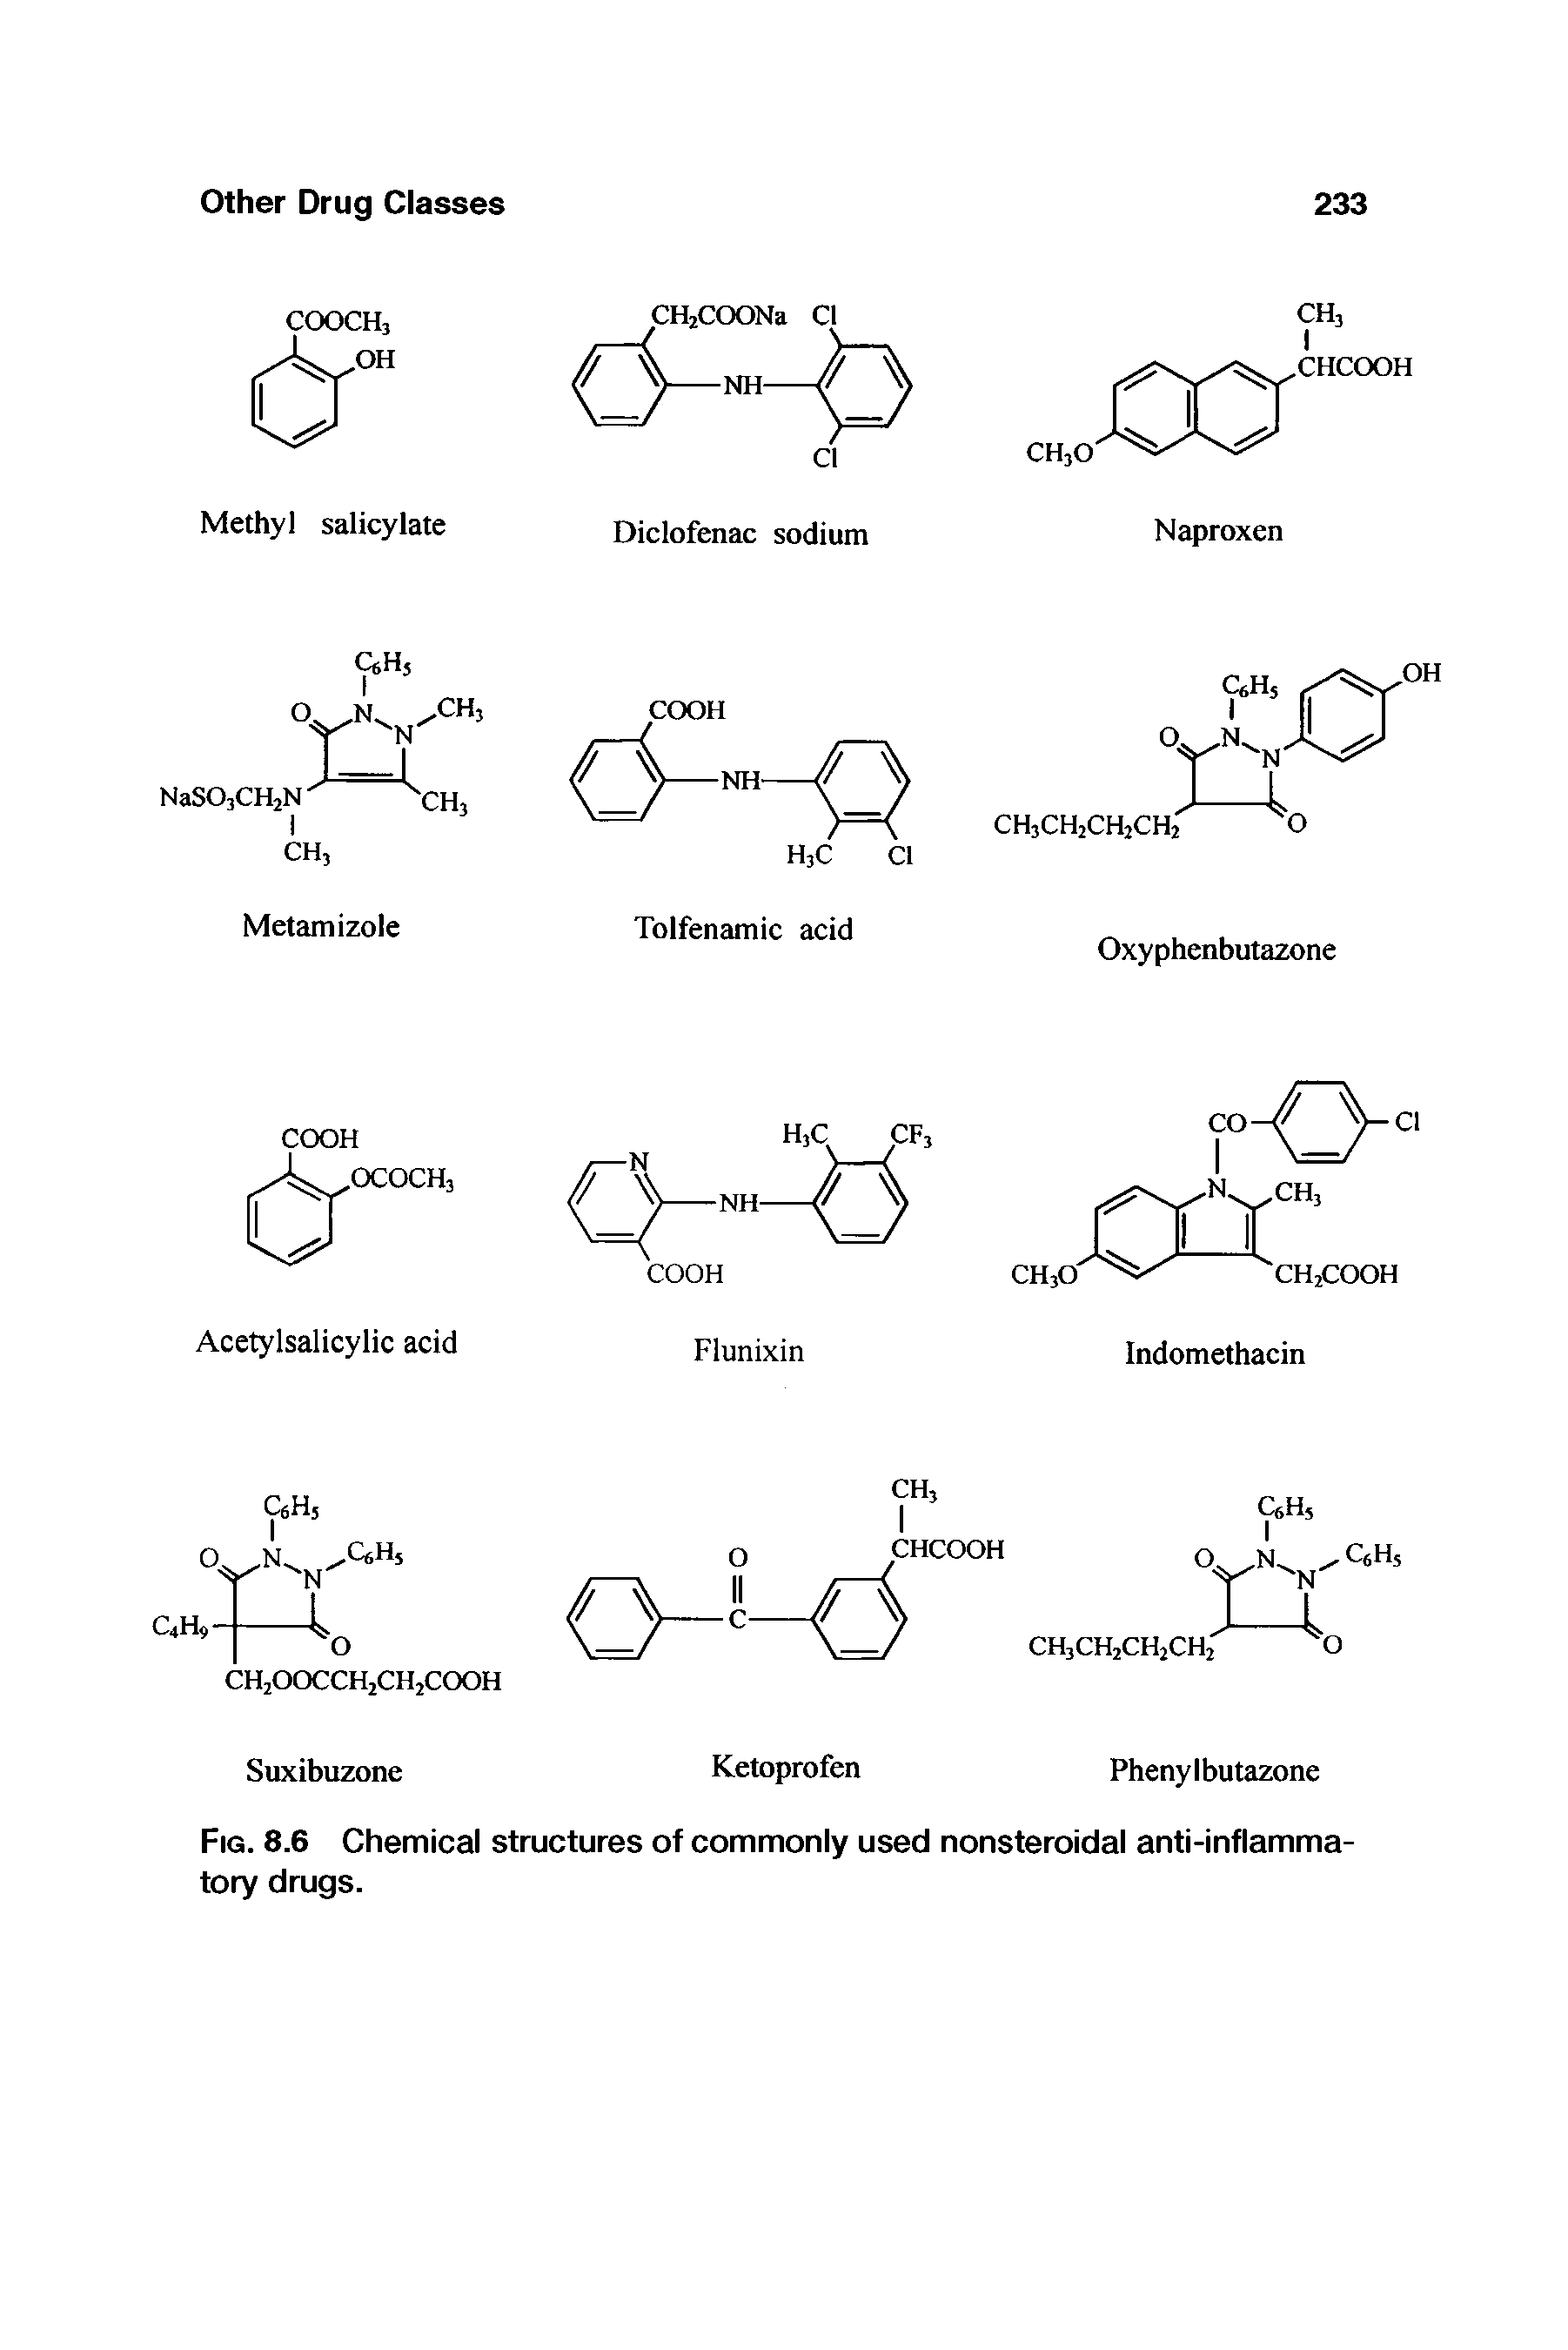 Fig. 8.6 Chemical structures of commonly used nonsteroidal anti-inflammatory drugs.